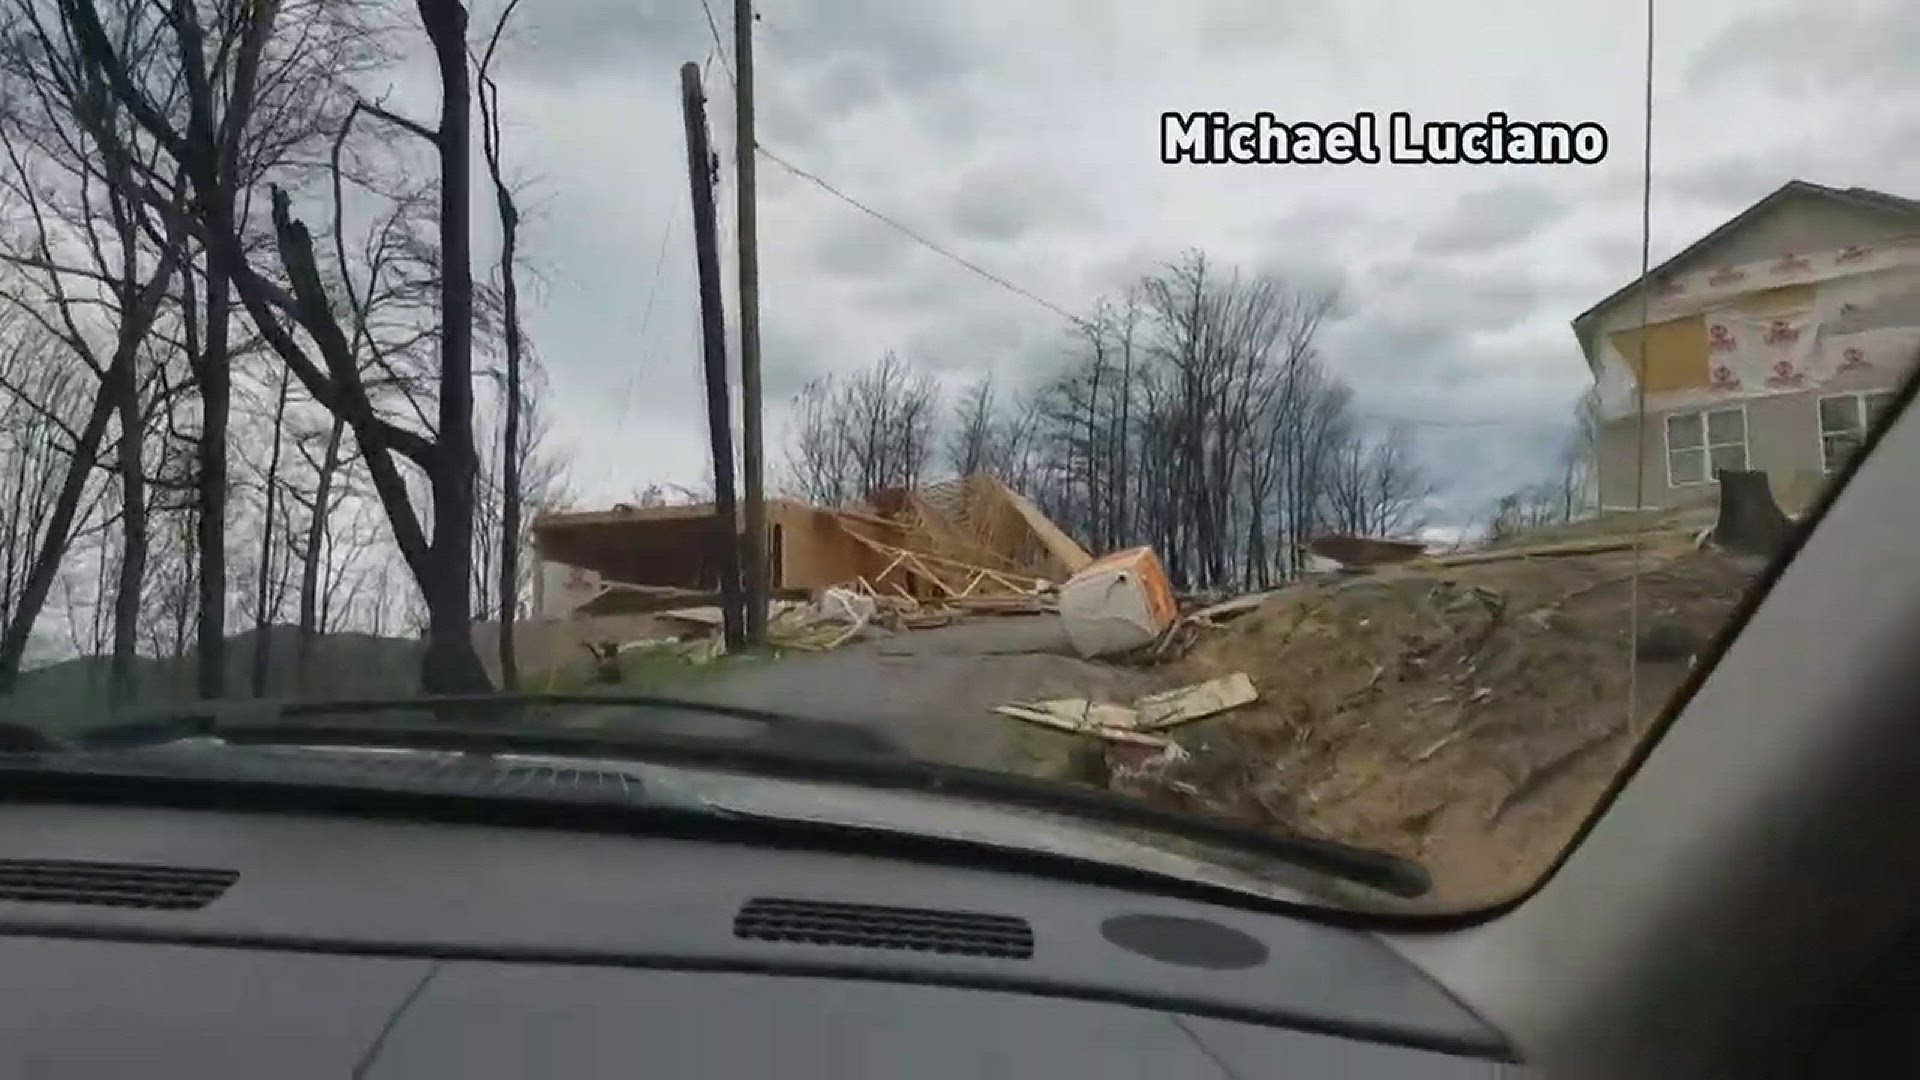 Construction efforts in the Chalet Village and Cobbly Nob communities  took a hit from high winds, according to resident Michael Luciano. He shared video and photos of the damage with WBIR.